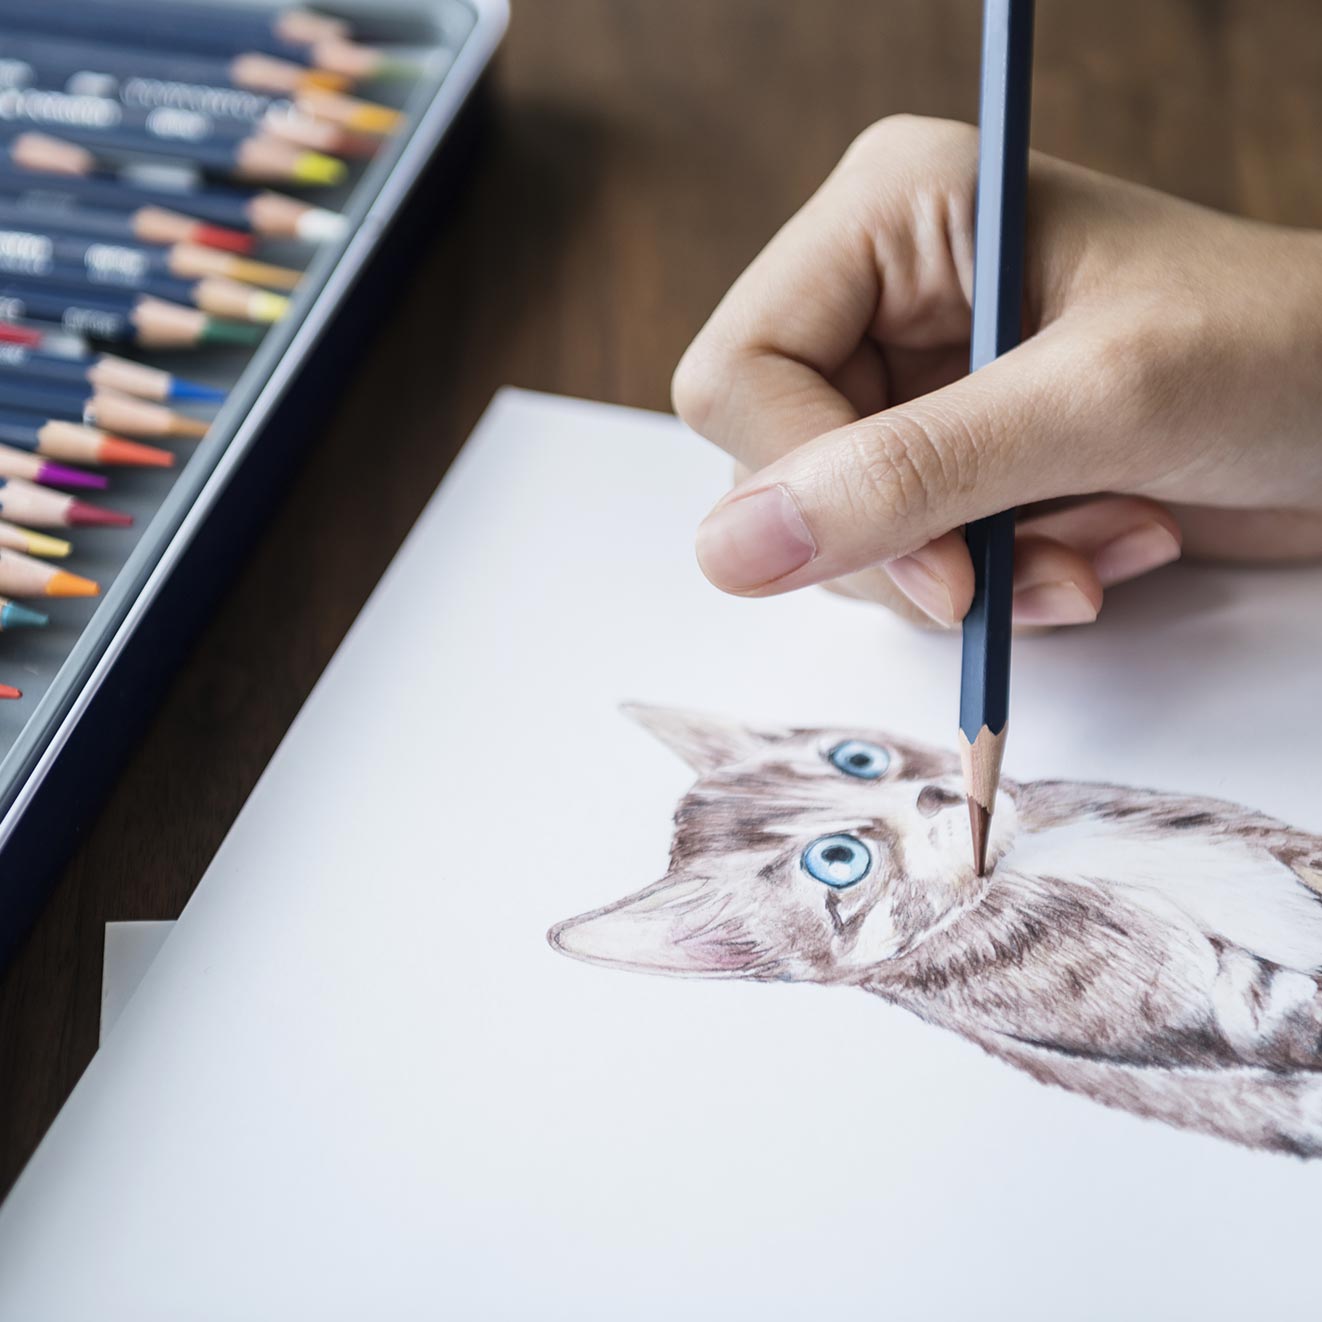 What Are the Best Colored Pencils for Artists to Use? - Leona Creo